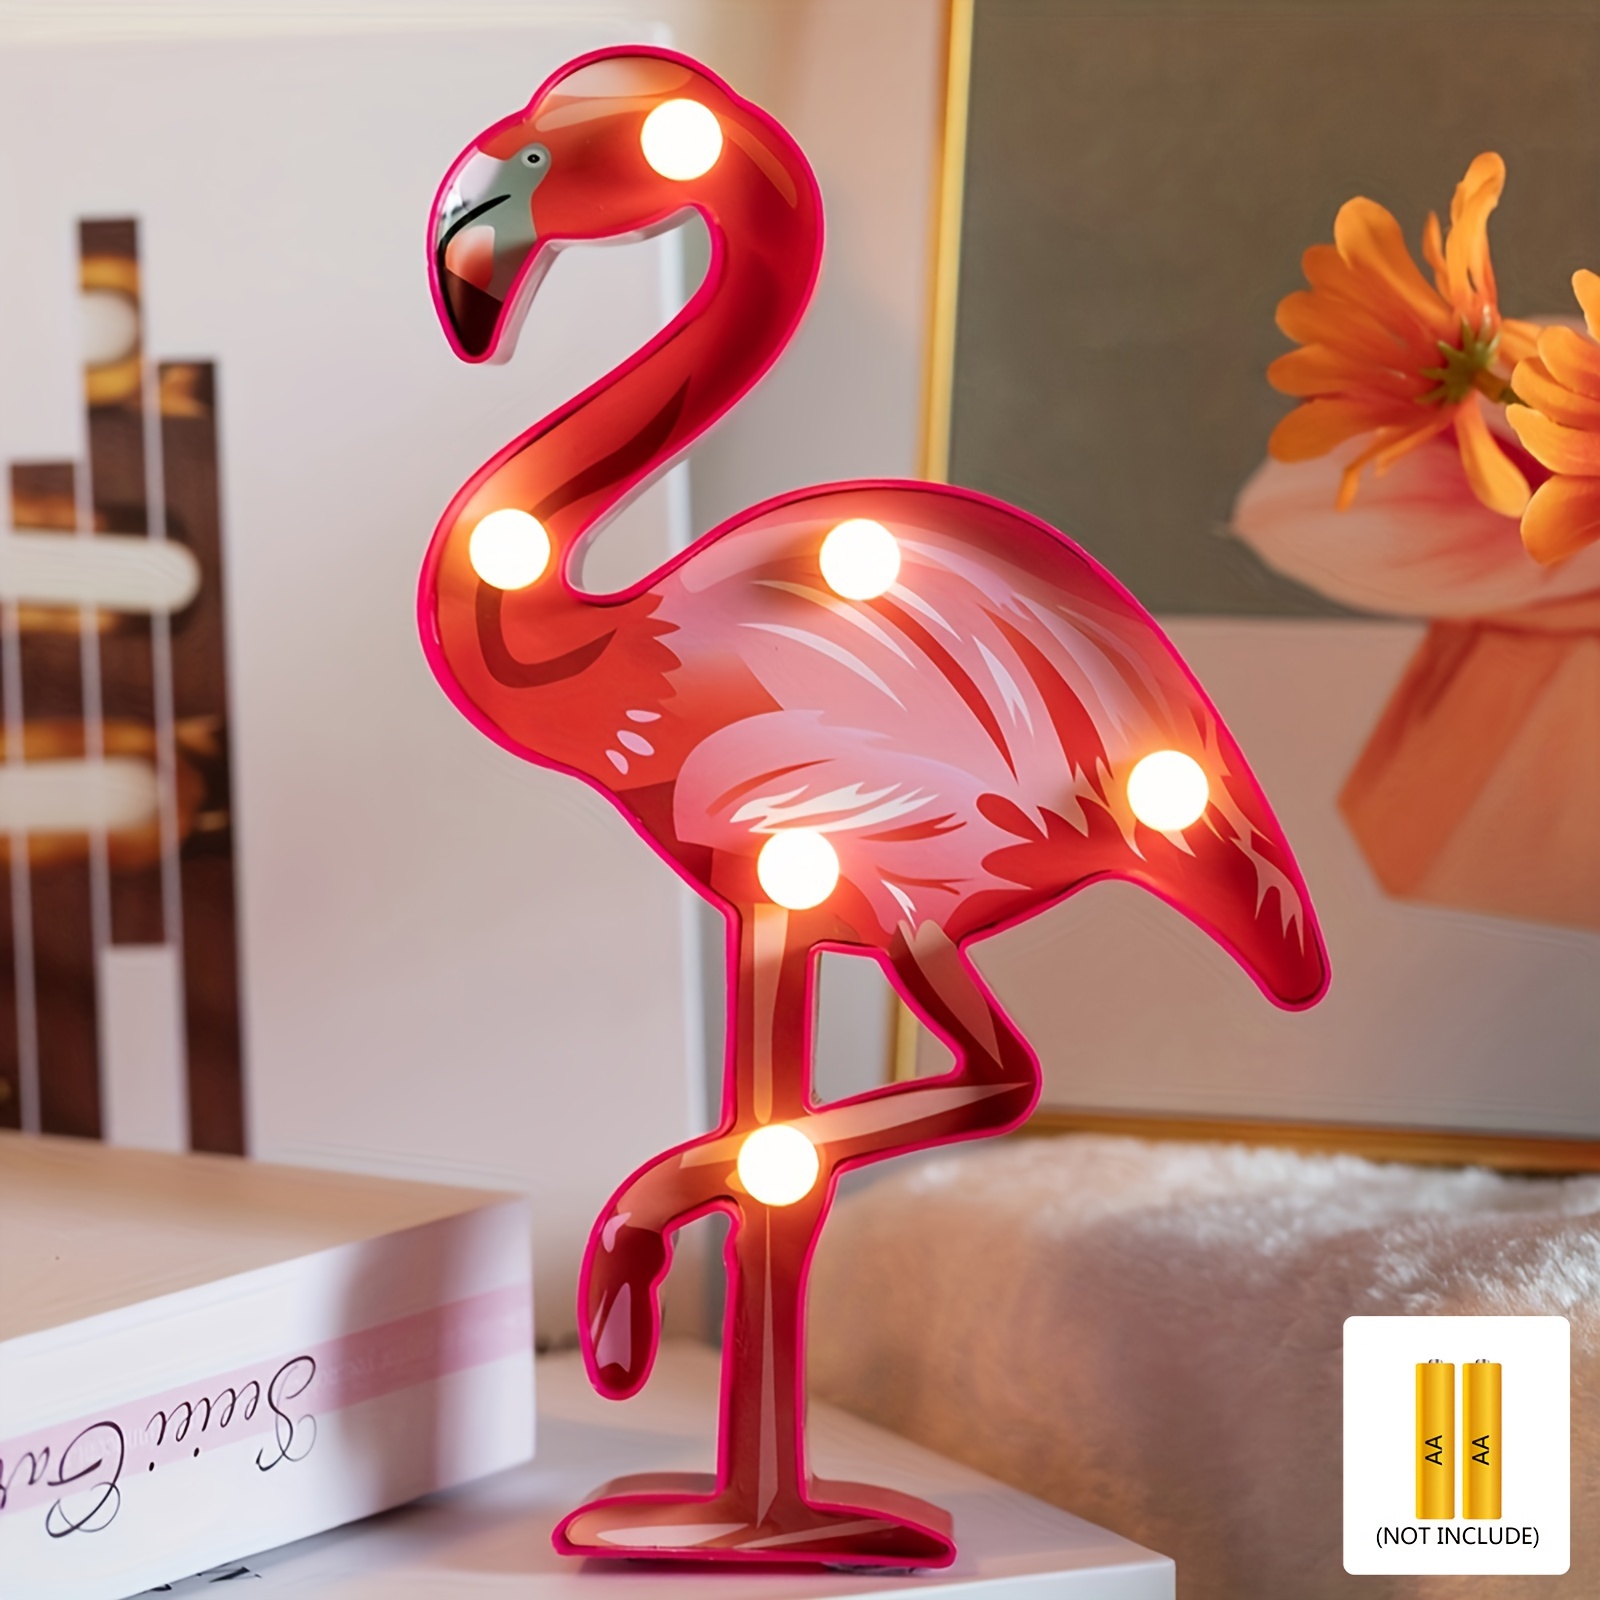 

Add A Tropical Touch To Your Home With This Flamingo-shaped Decorative Light!